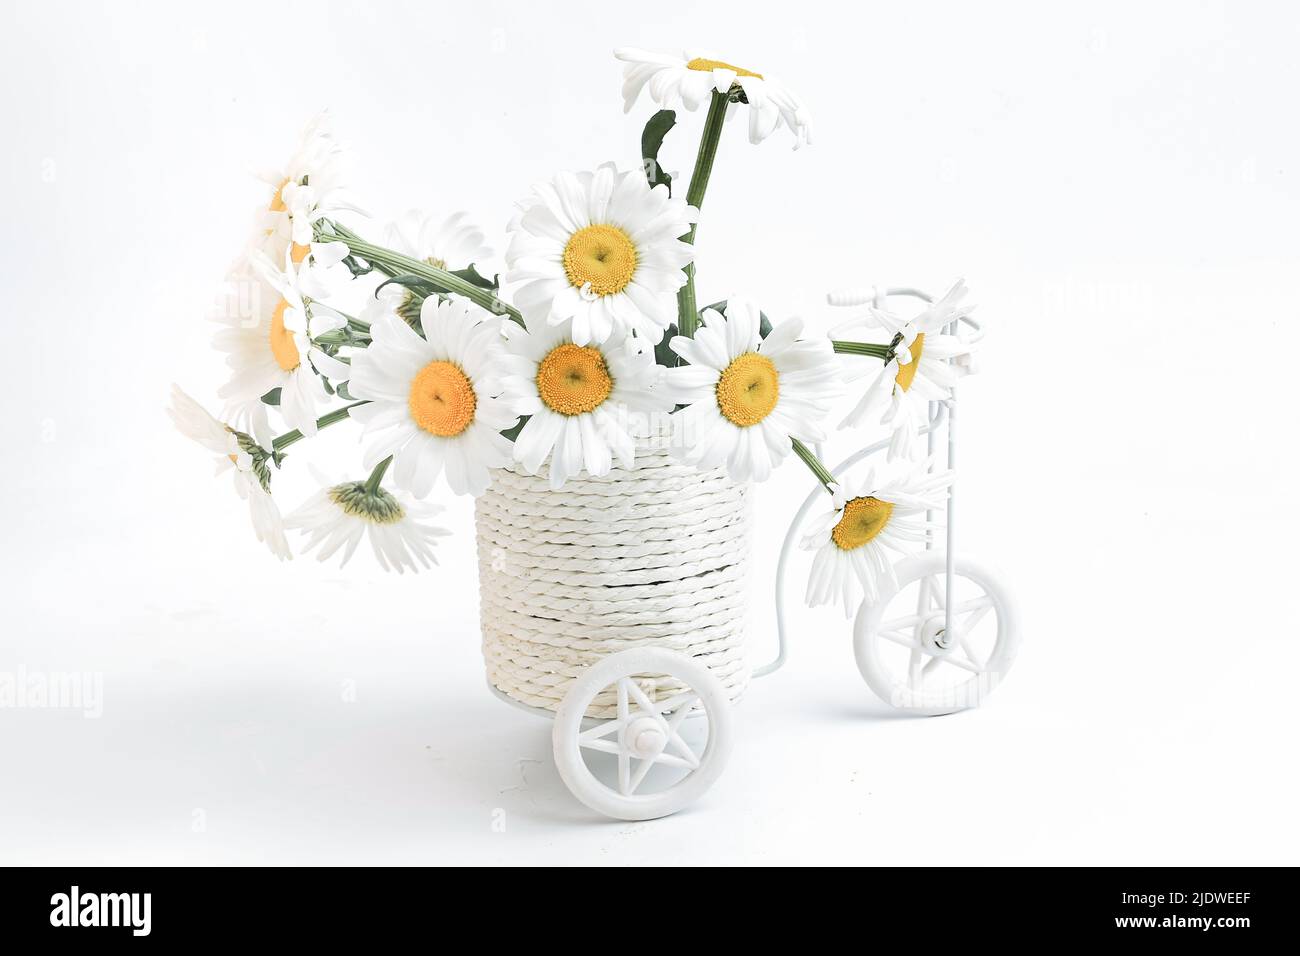 car free day. Ecological concept. Bicycles and plants against the pollution of the world. White bicycle with a bouquet of daisies. Stock Photo